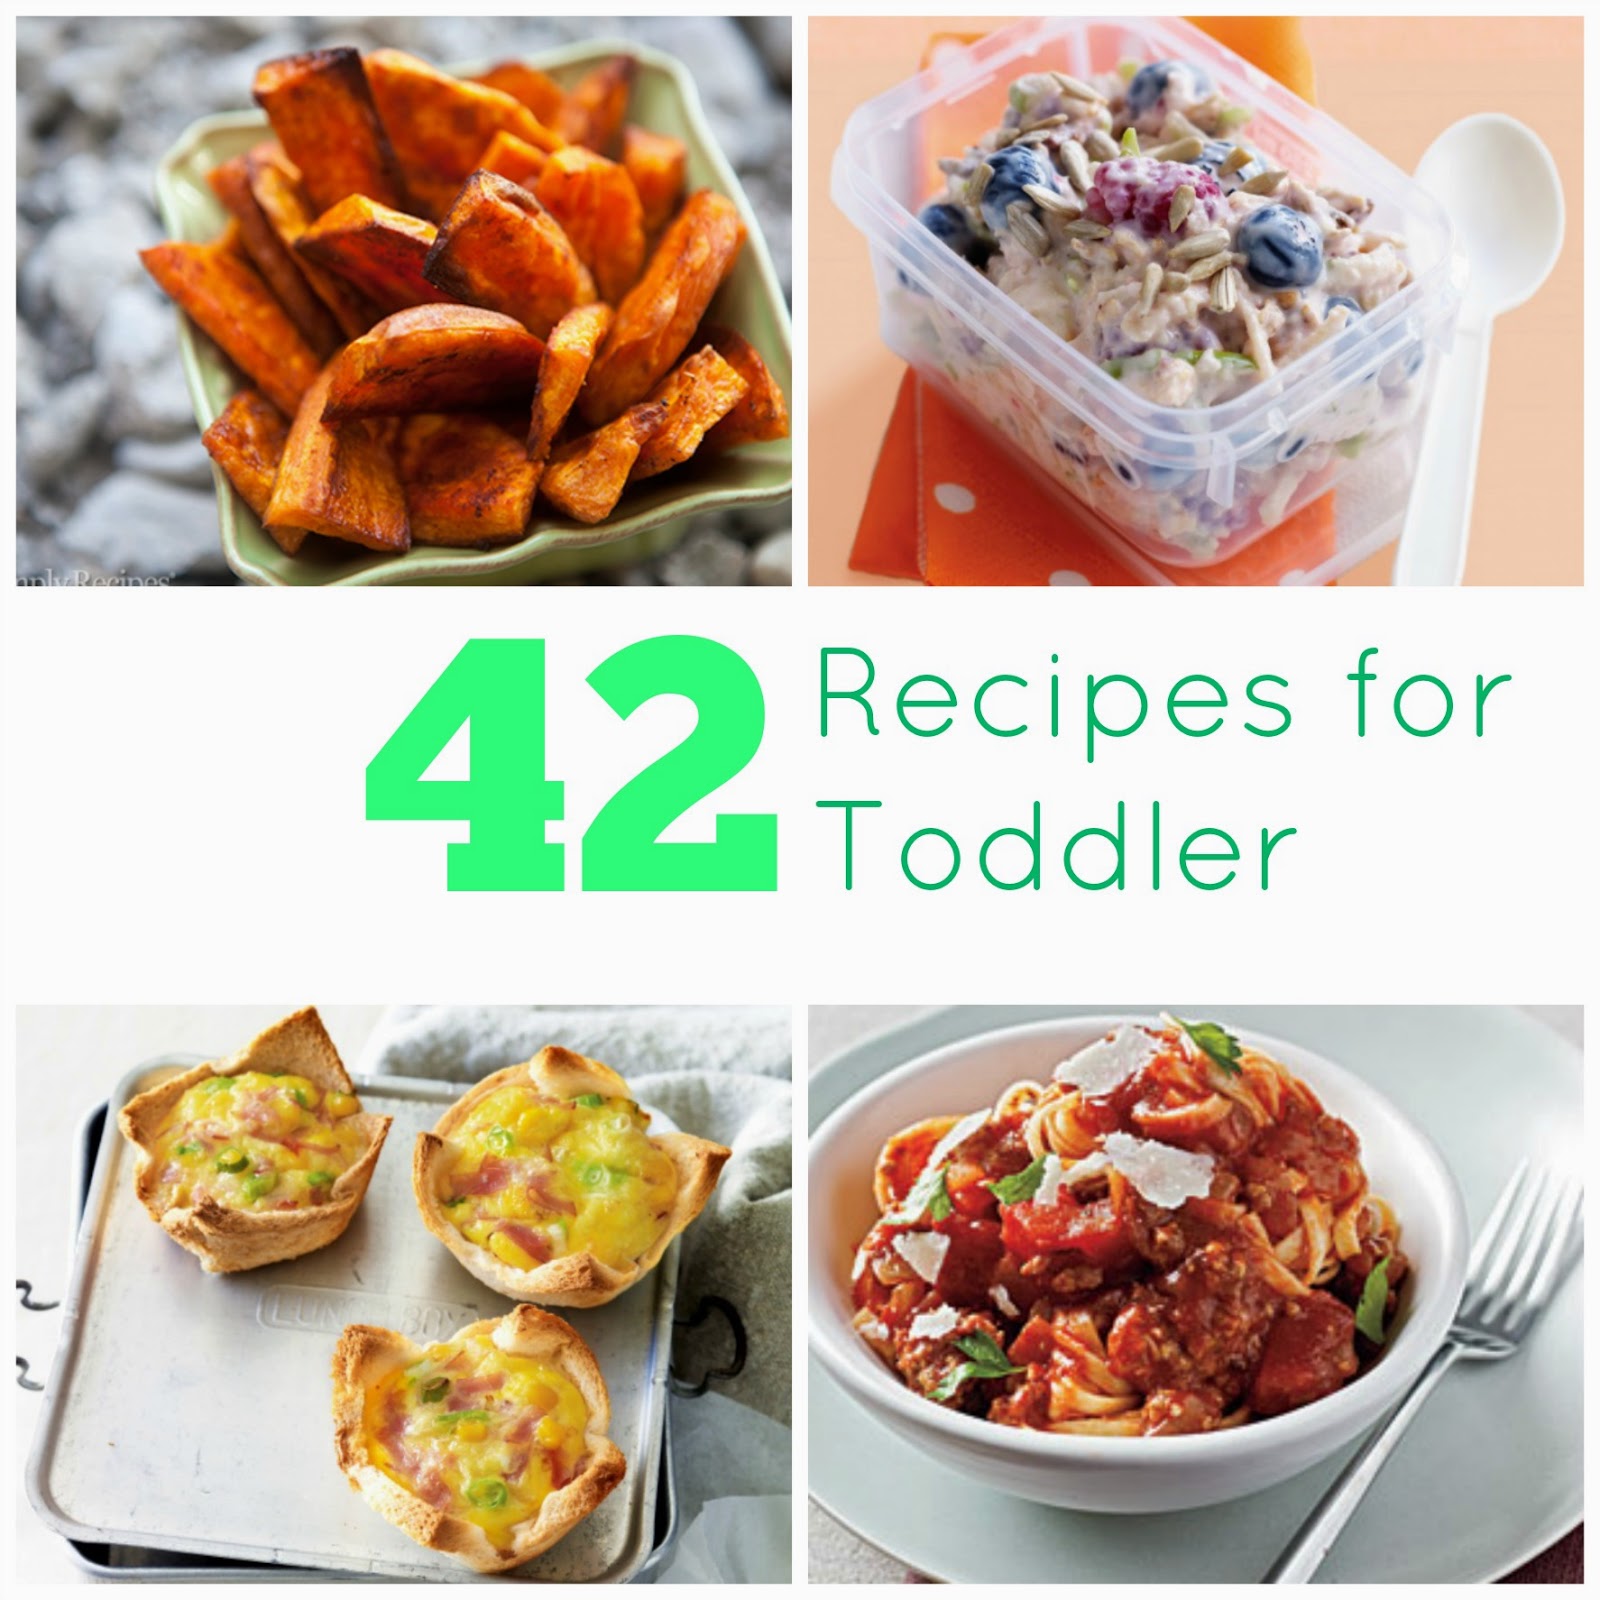 42 Recipes For Toddler - The Chill Mom